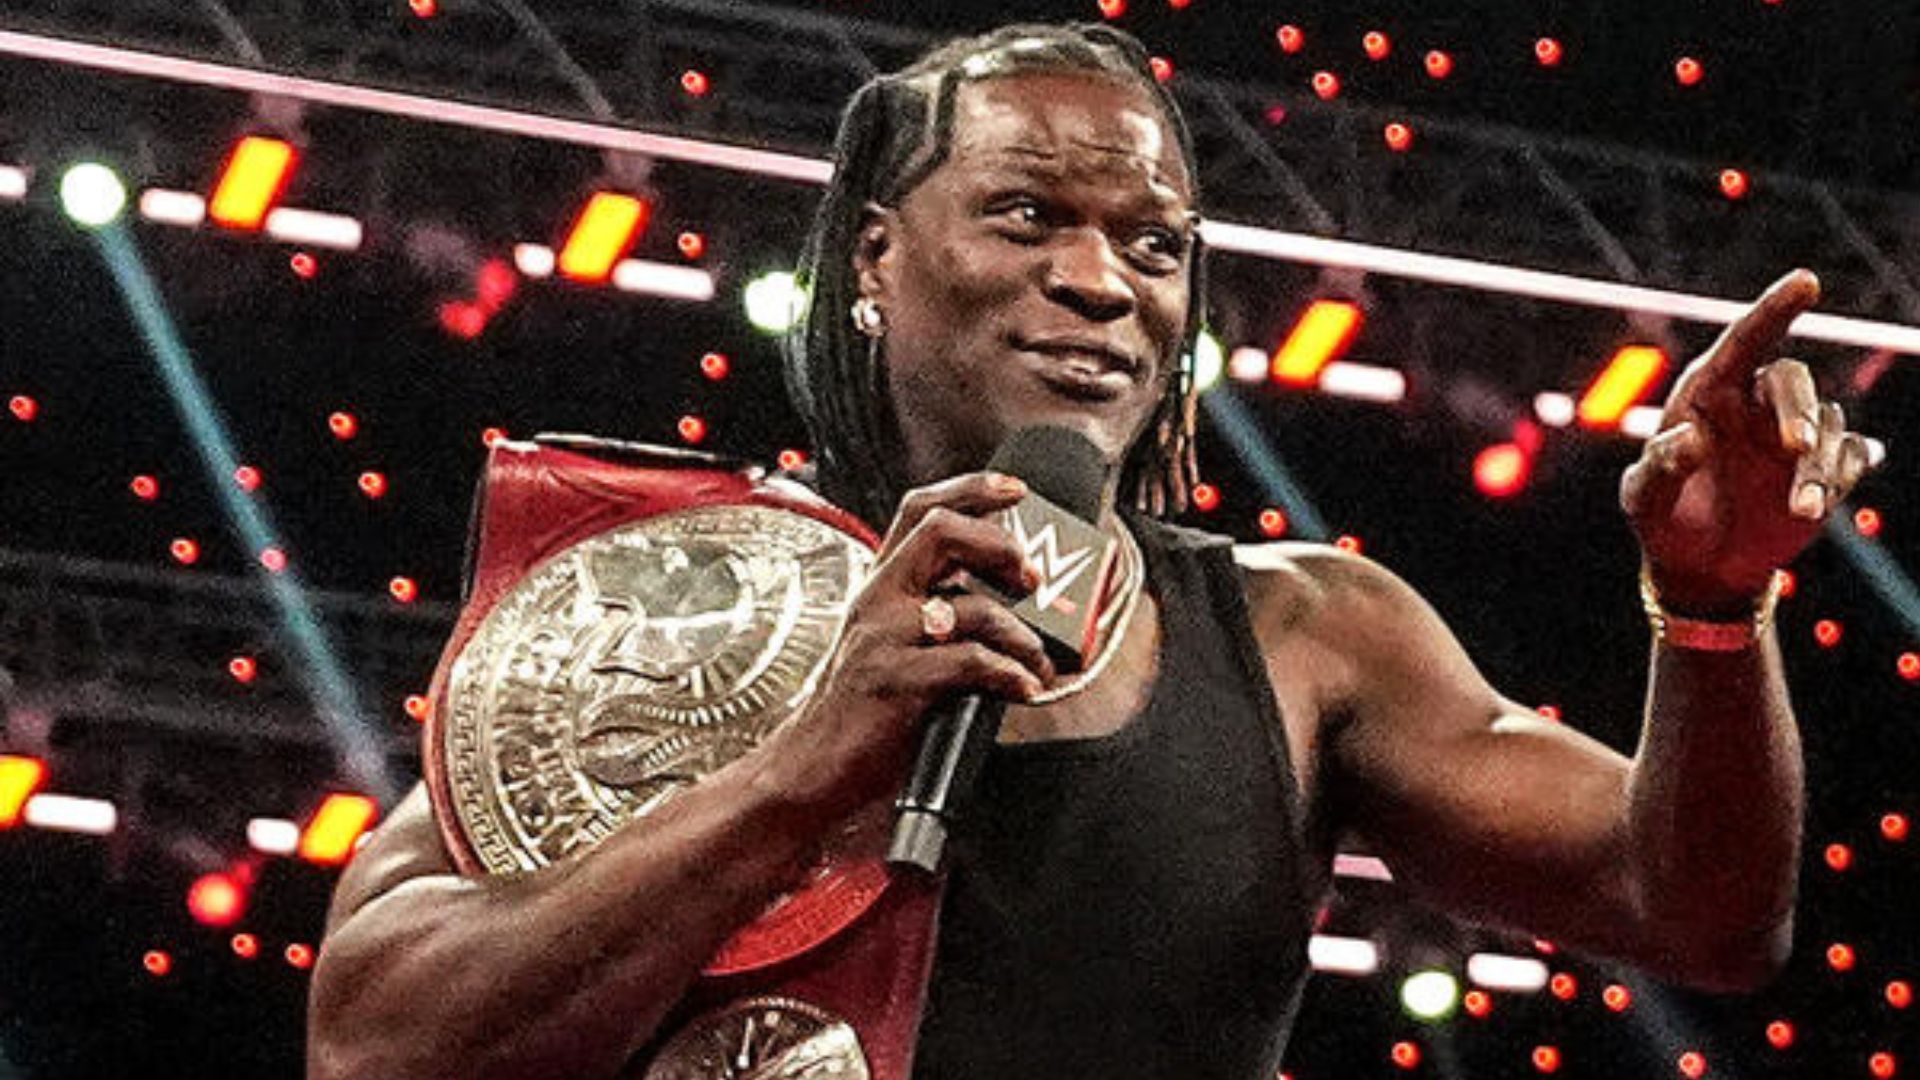 R-Truth is now a former World Tag Team Champion (Image Credits: WWE.com)